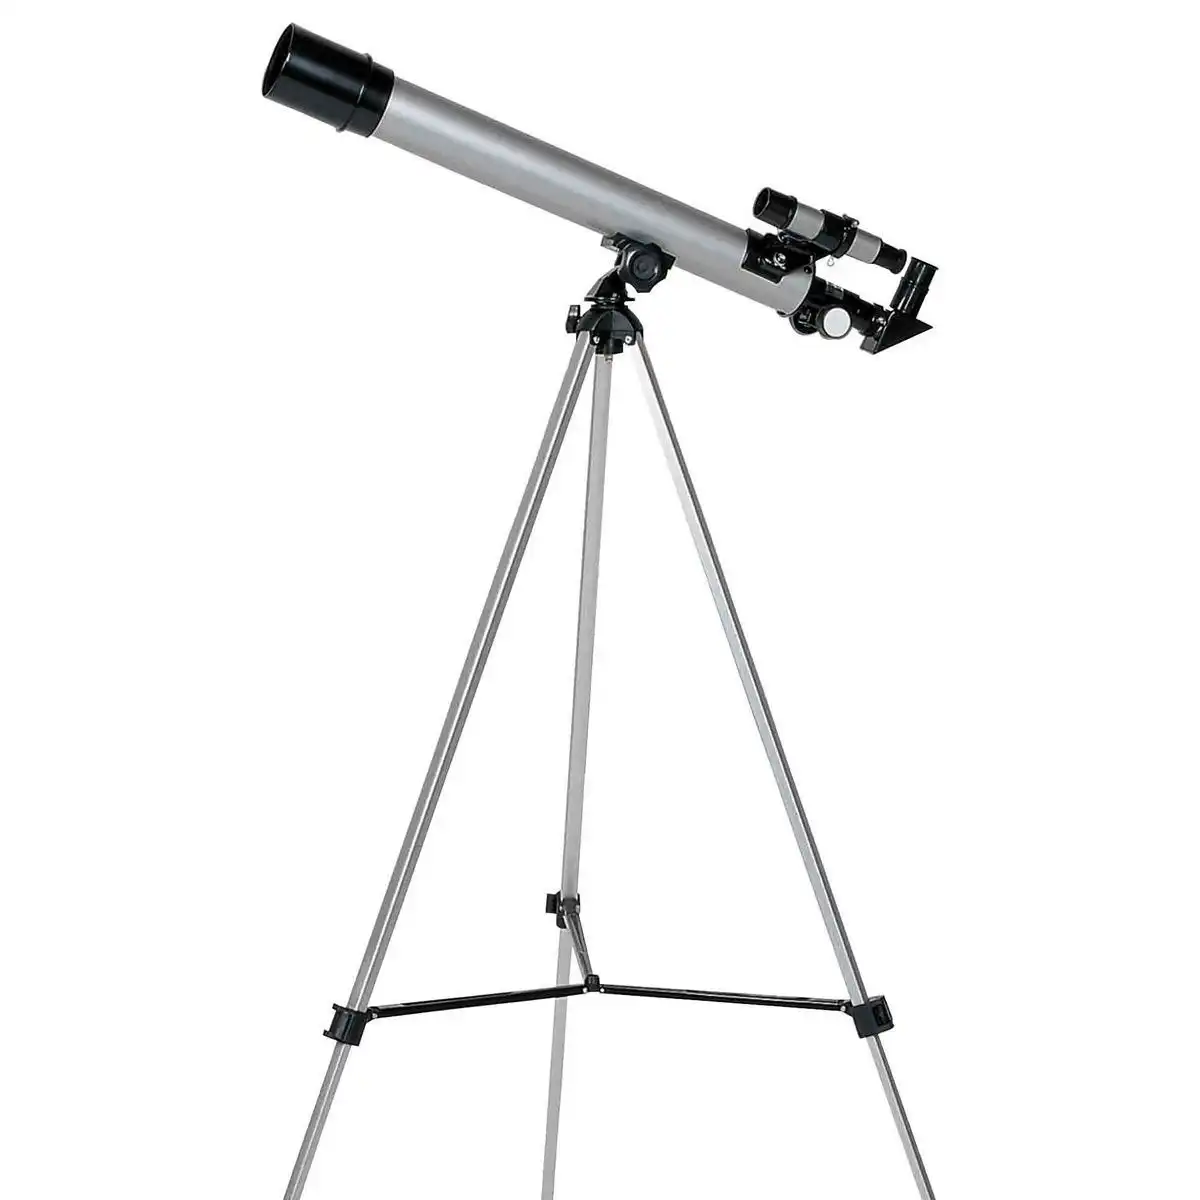 Ausway 50mm Space 150 X Zoom Astronomical Telescope